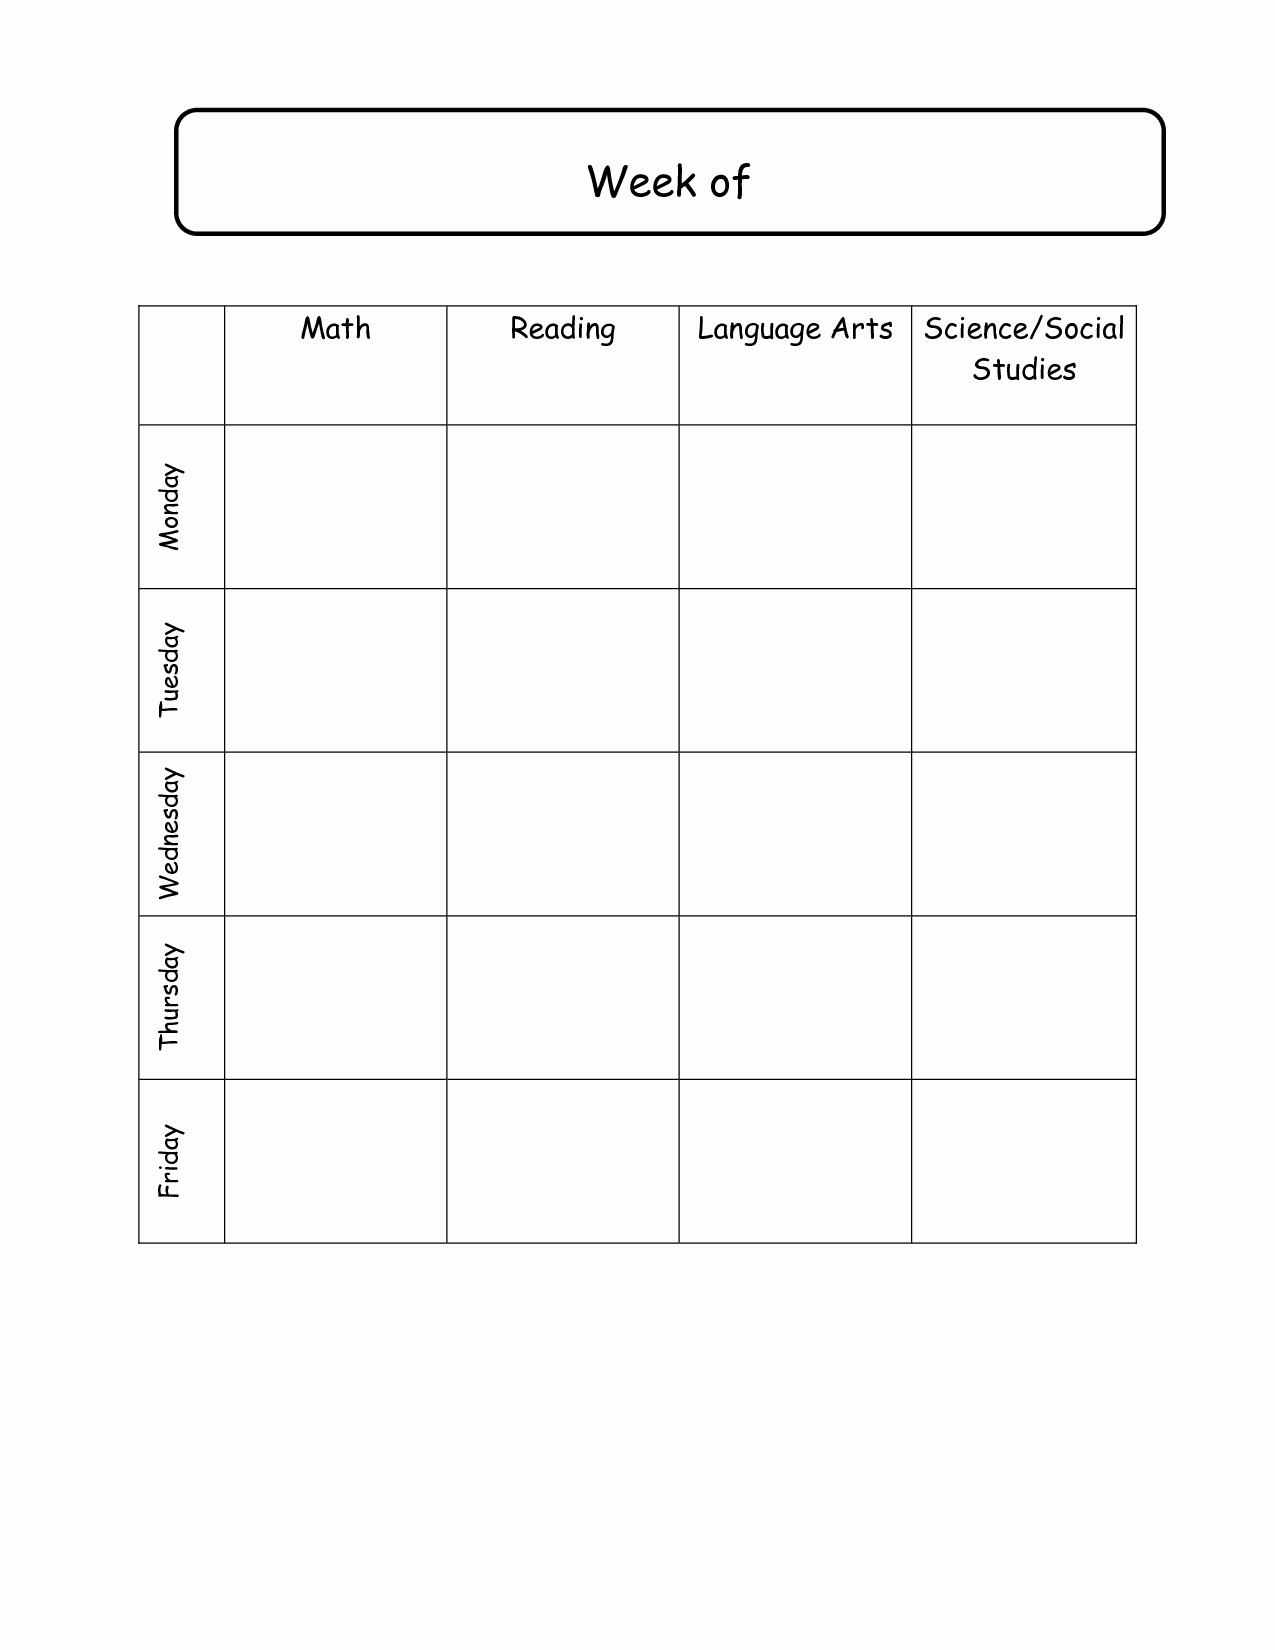 Classroom Management Plan Template Elementary Awesome Elementary School Daily Schedule Template